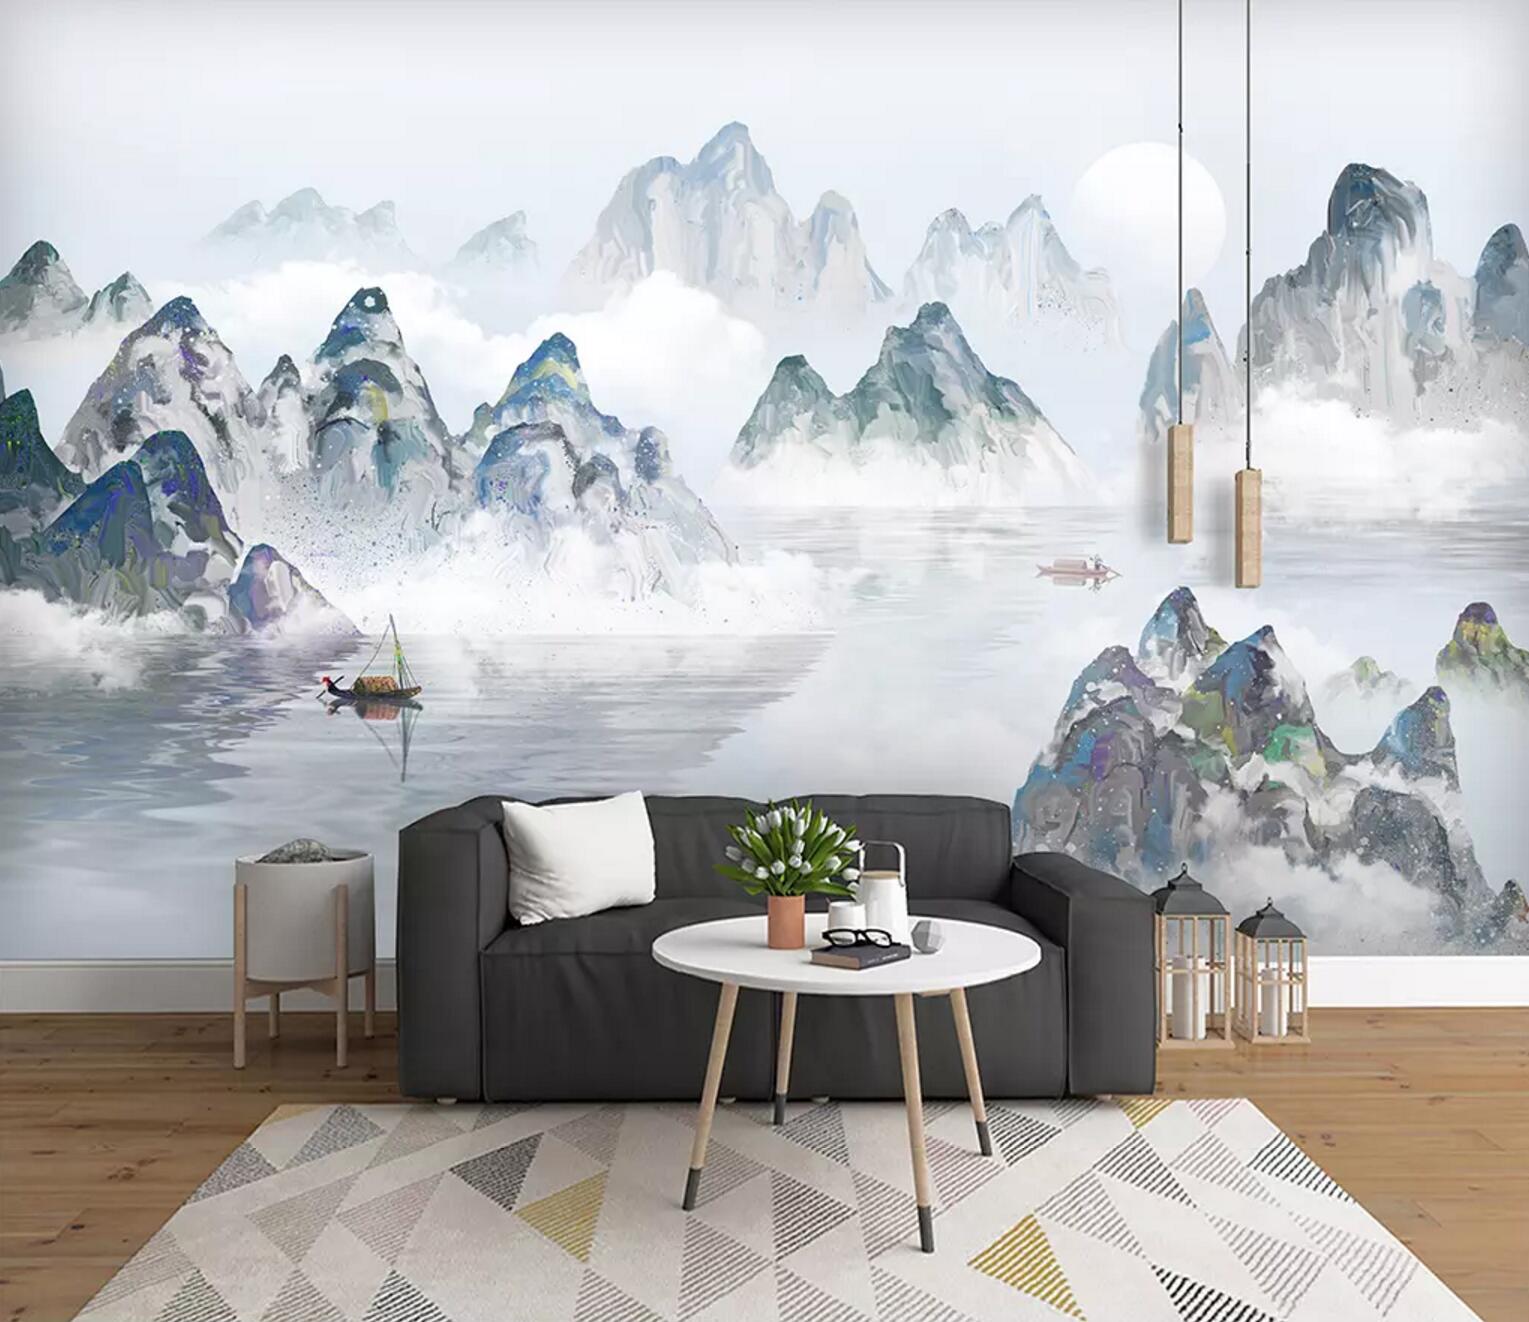 3D Valley Lake WC620 Wall Murals